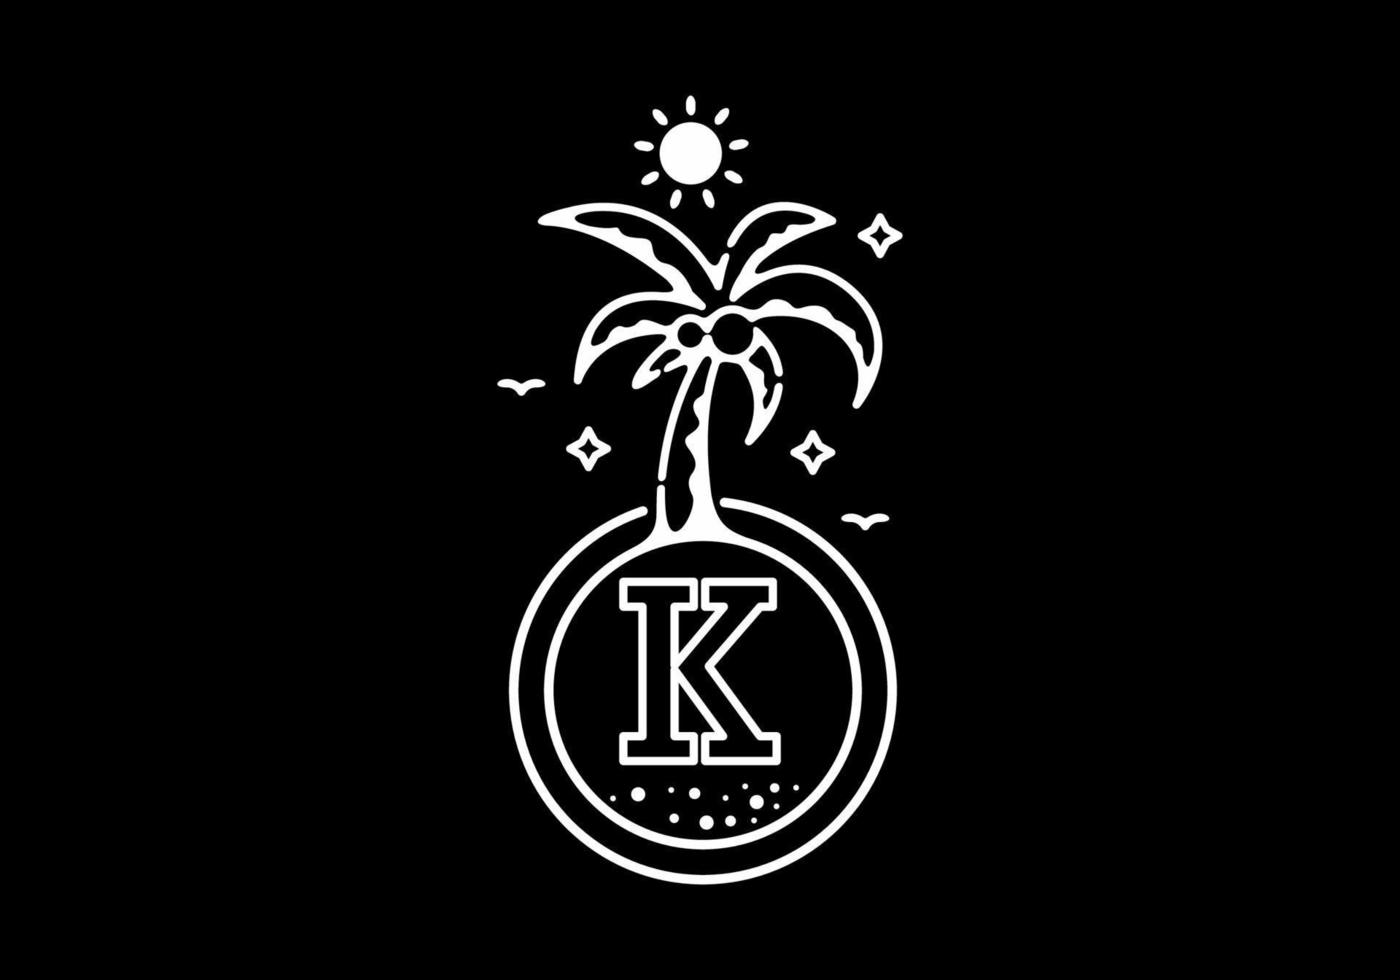 White black line art illustration of coconut tree in the beach with K initial letter vector